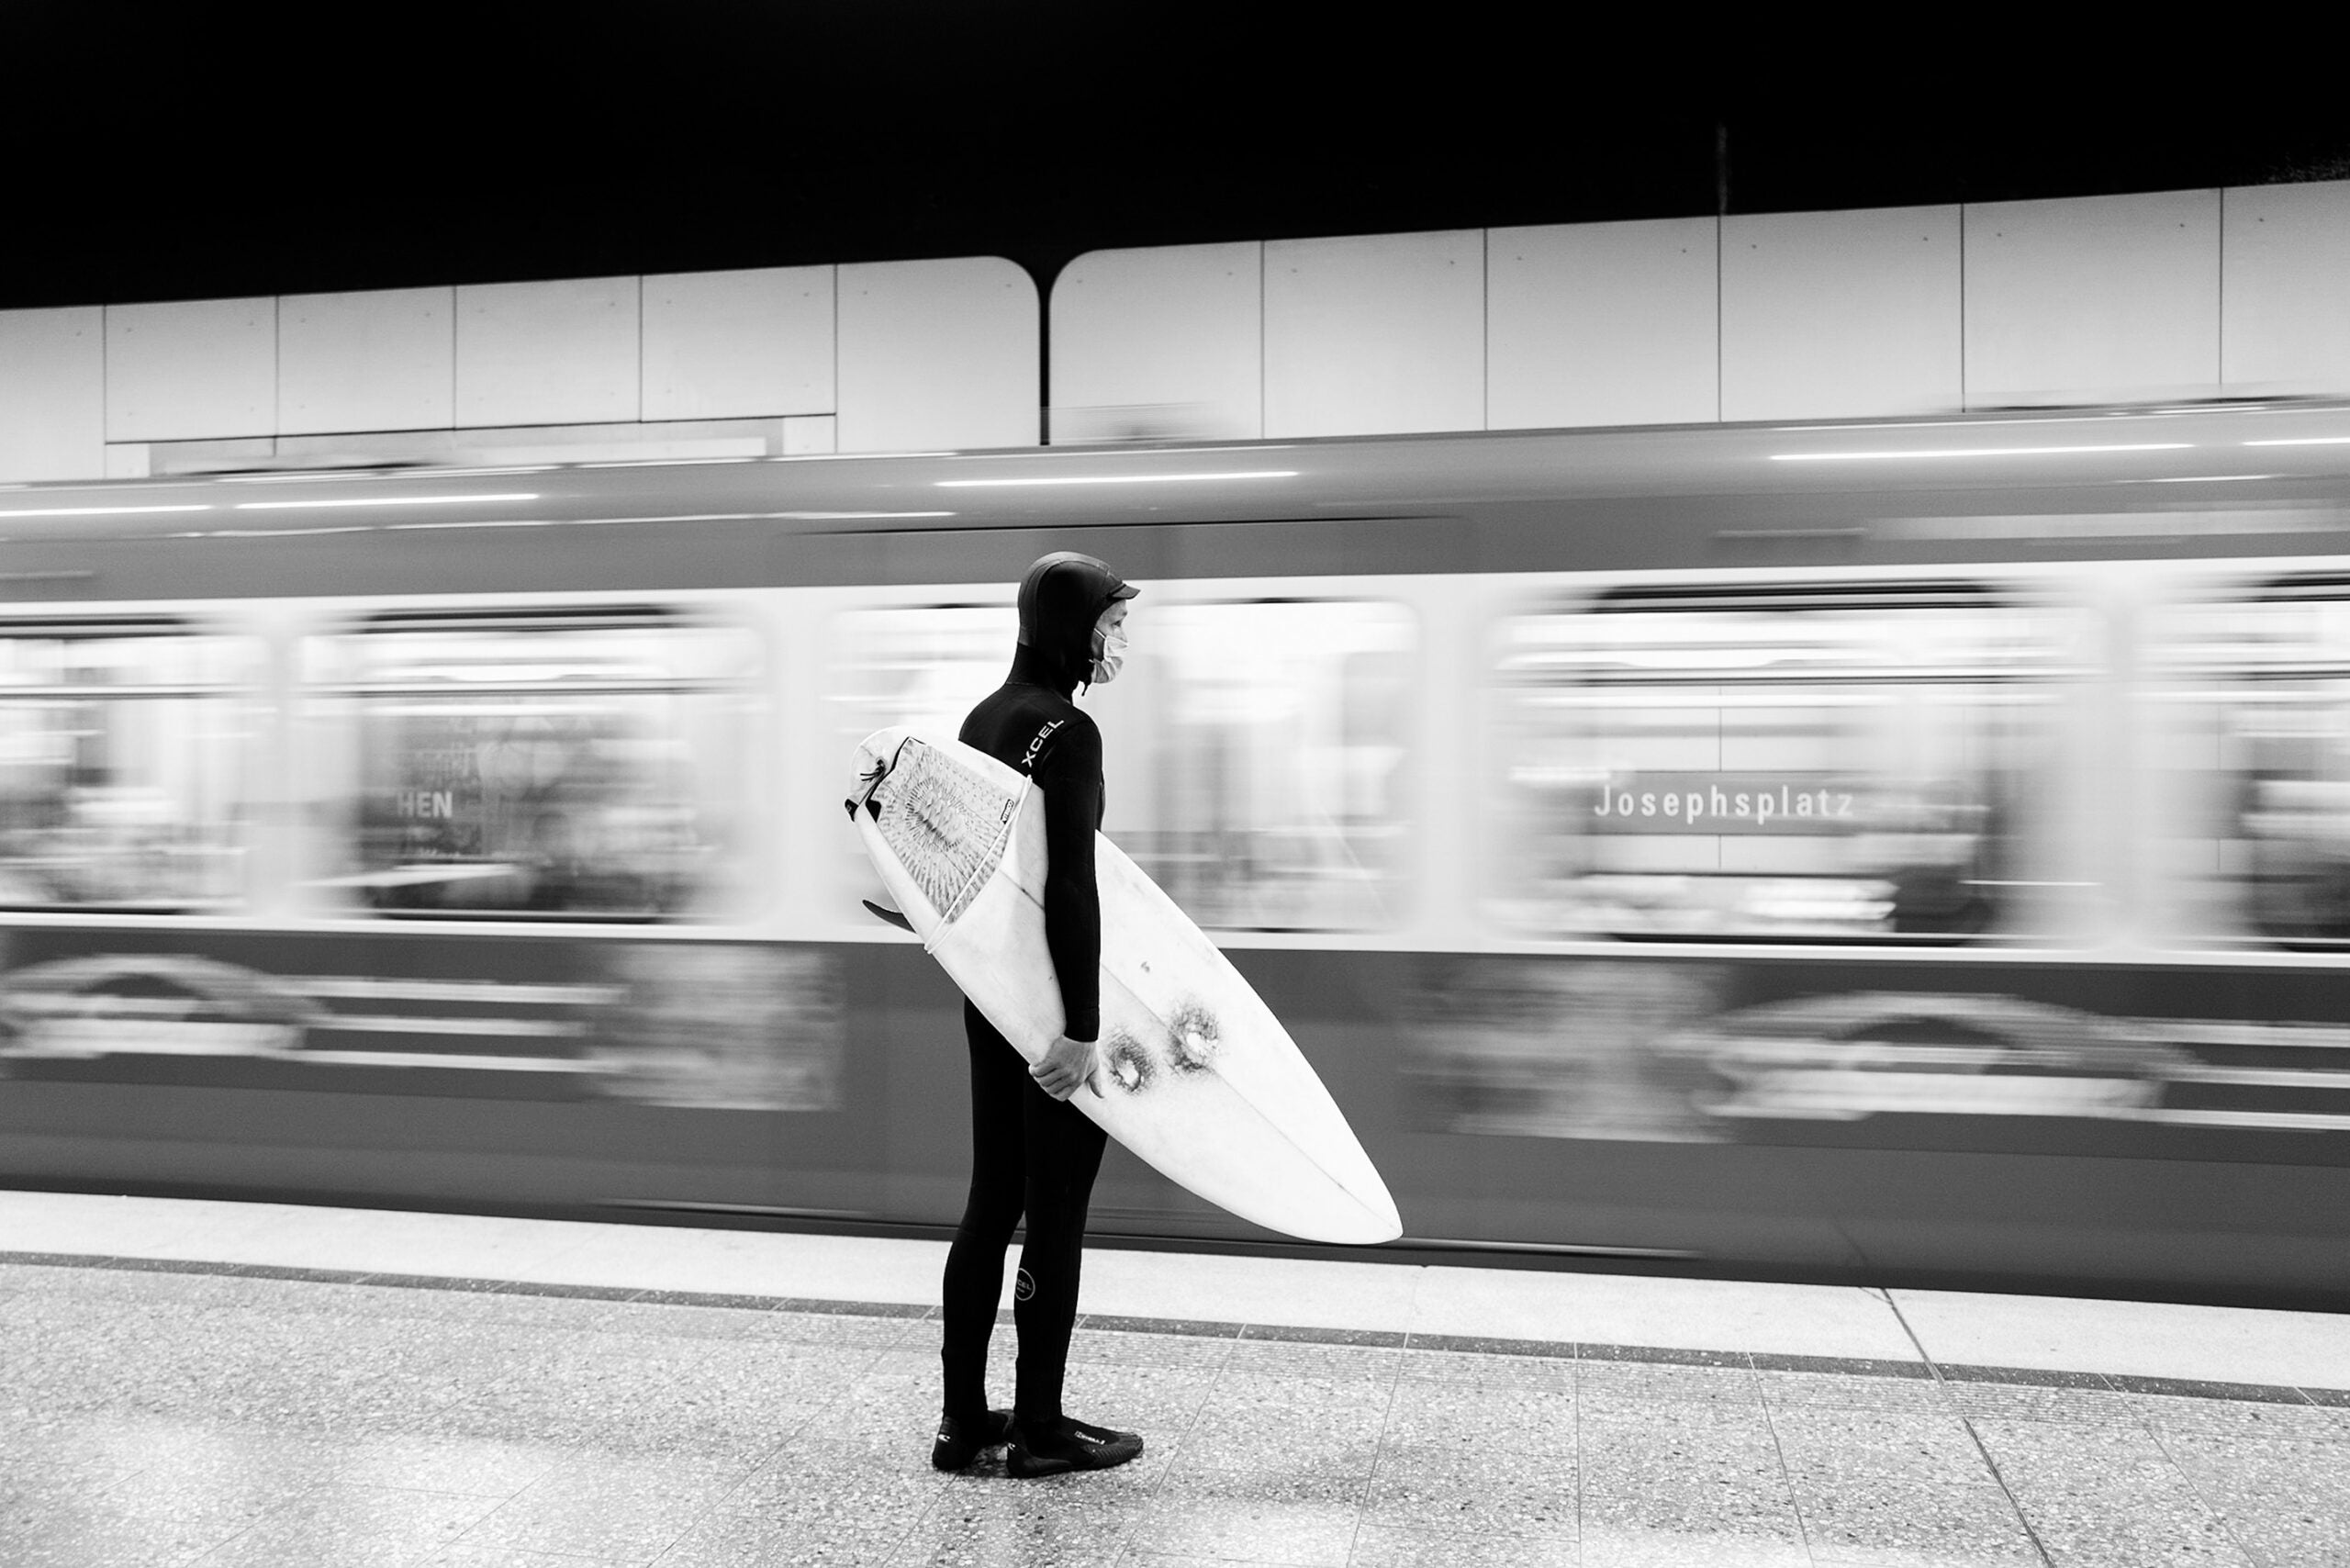 Carolin Unrath (Germany) won the Lifestyle by COOPH category for her black and white image of a surfer about to board a train in Munich.